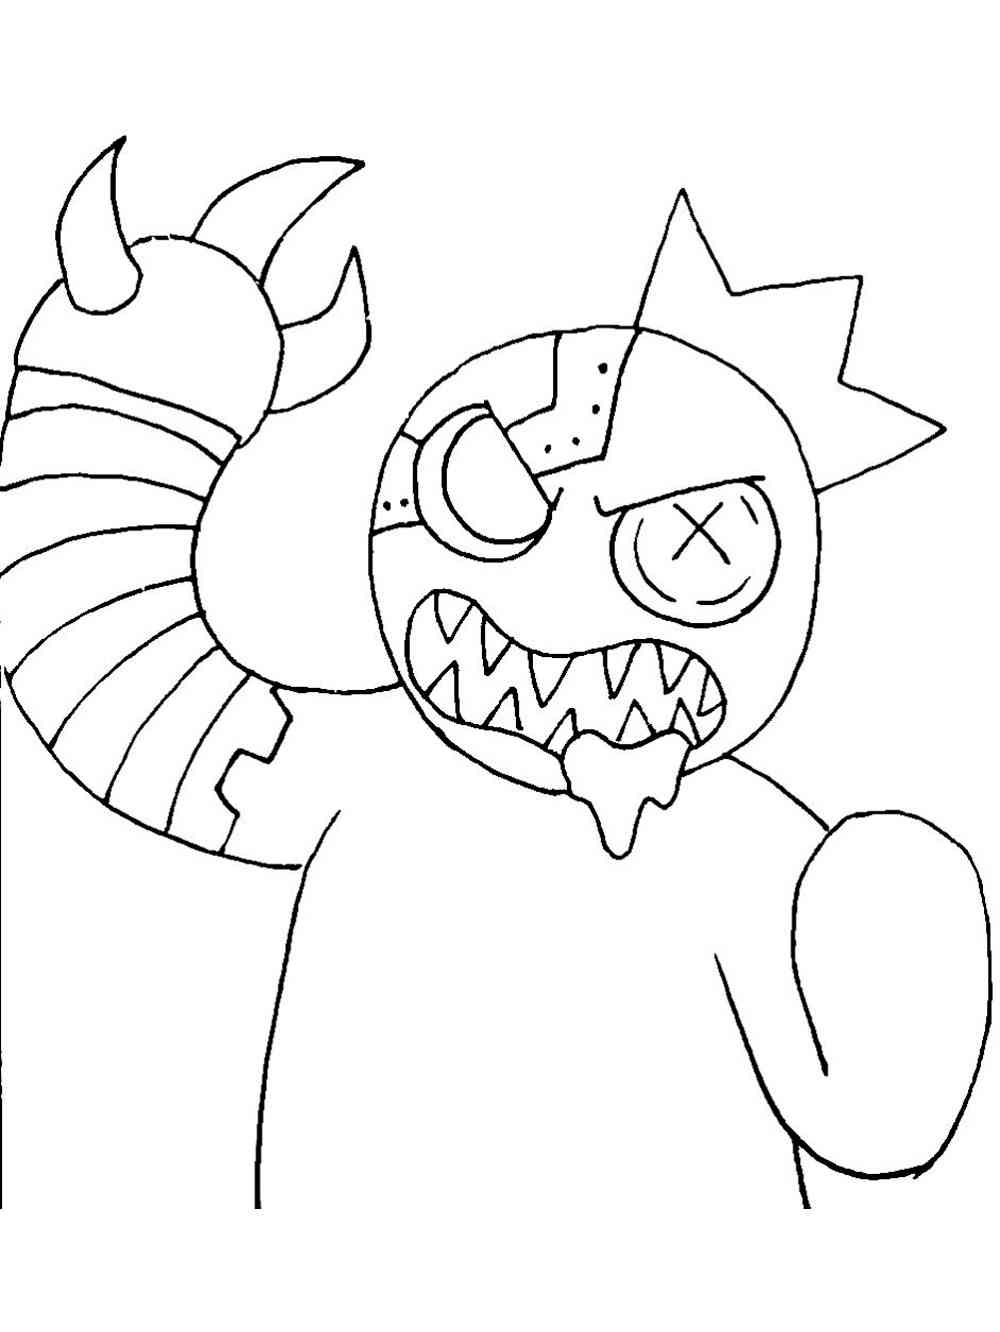 Orange in Rainbow Friends Roblox Coloring Pages - Free Printable